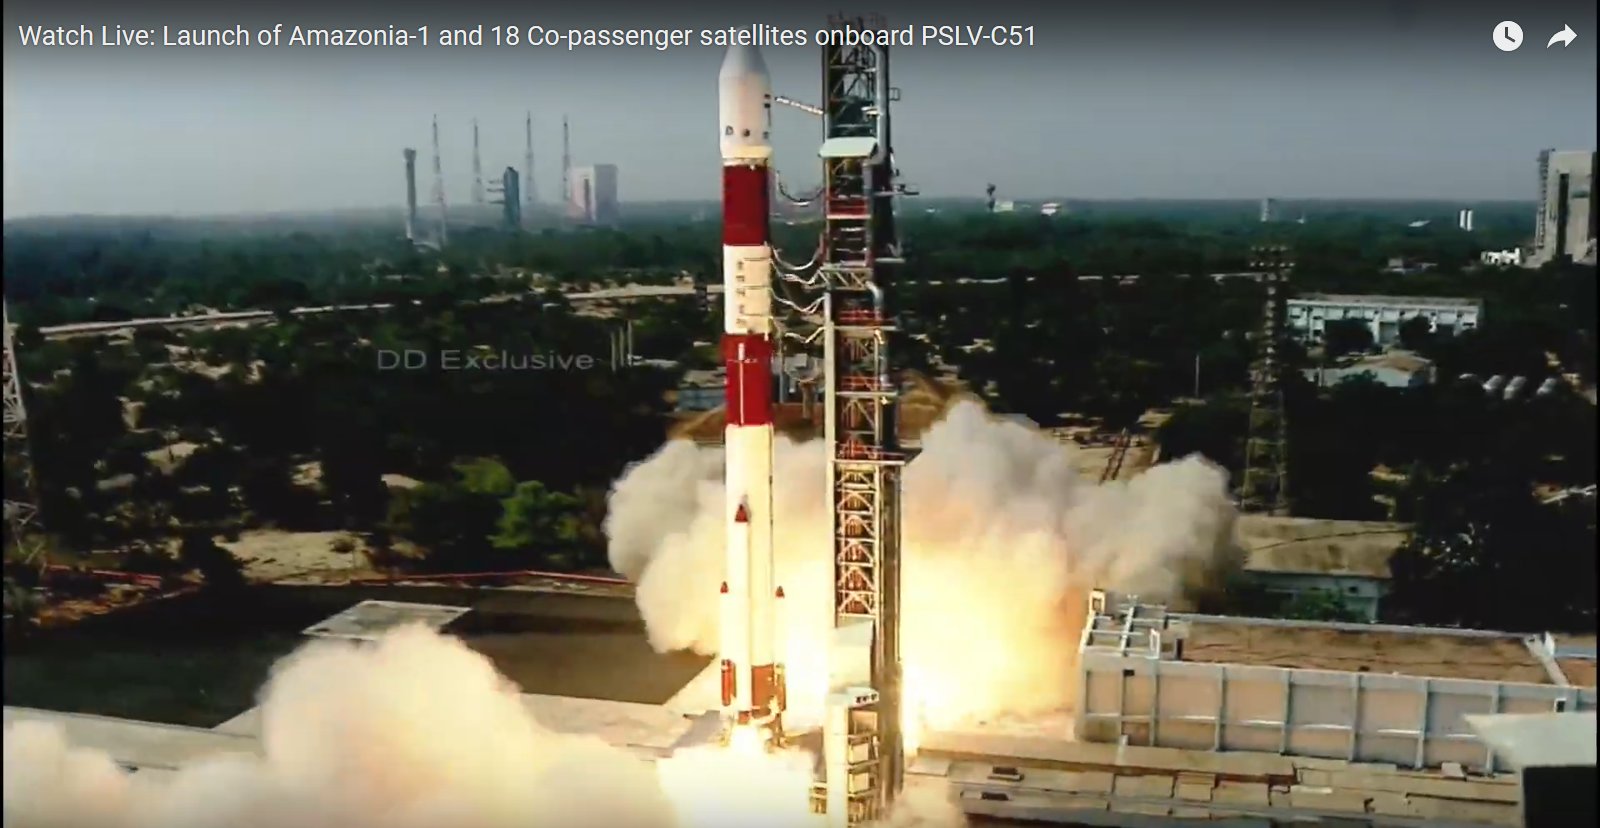 ISRO’s PSLV-C51 jets off with Brazilian satellite, 18 others